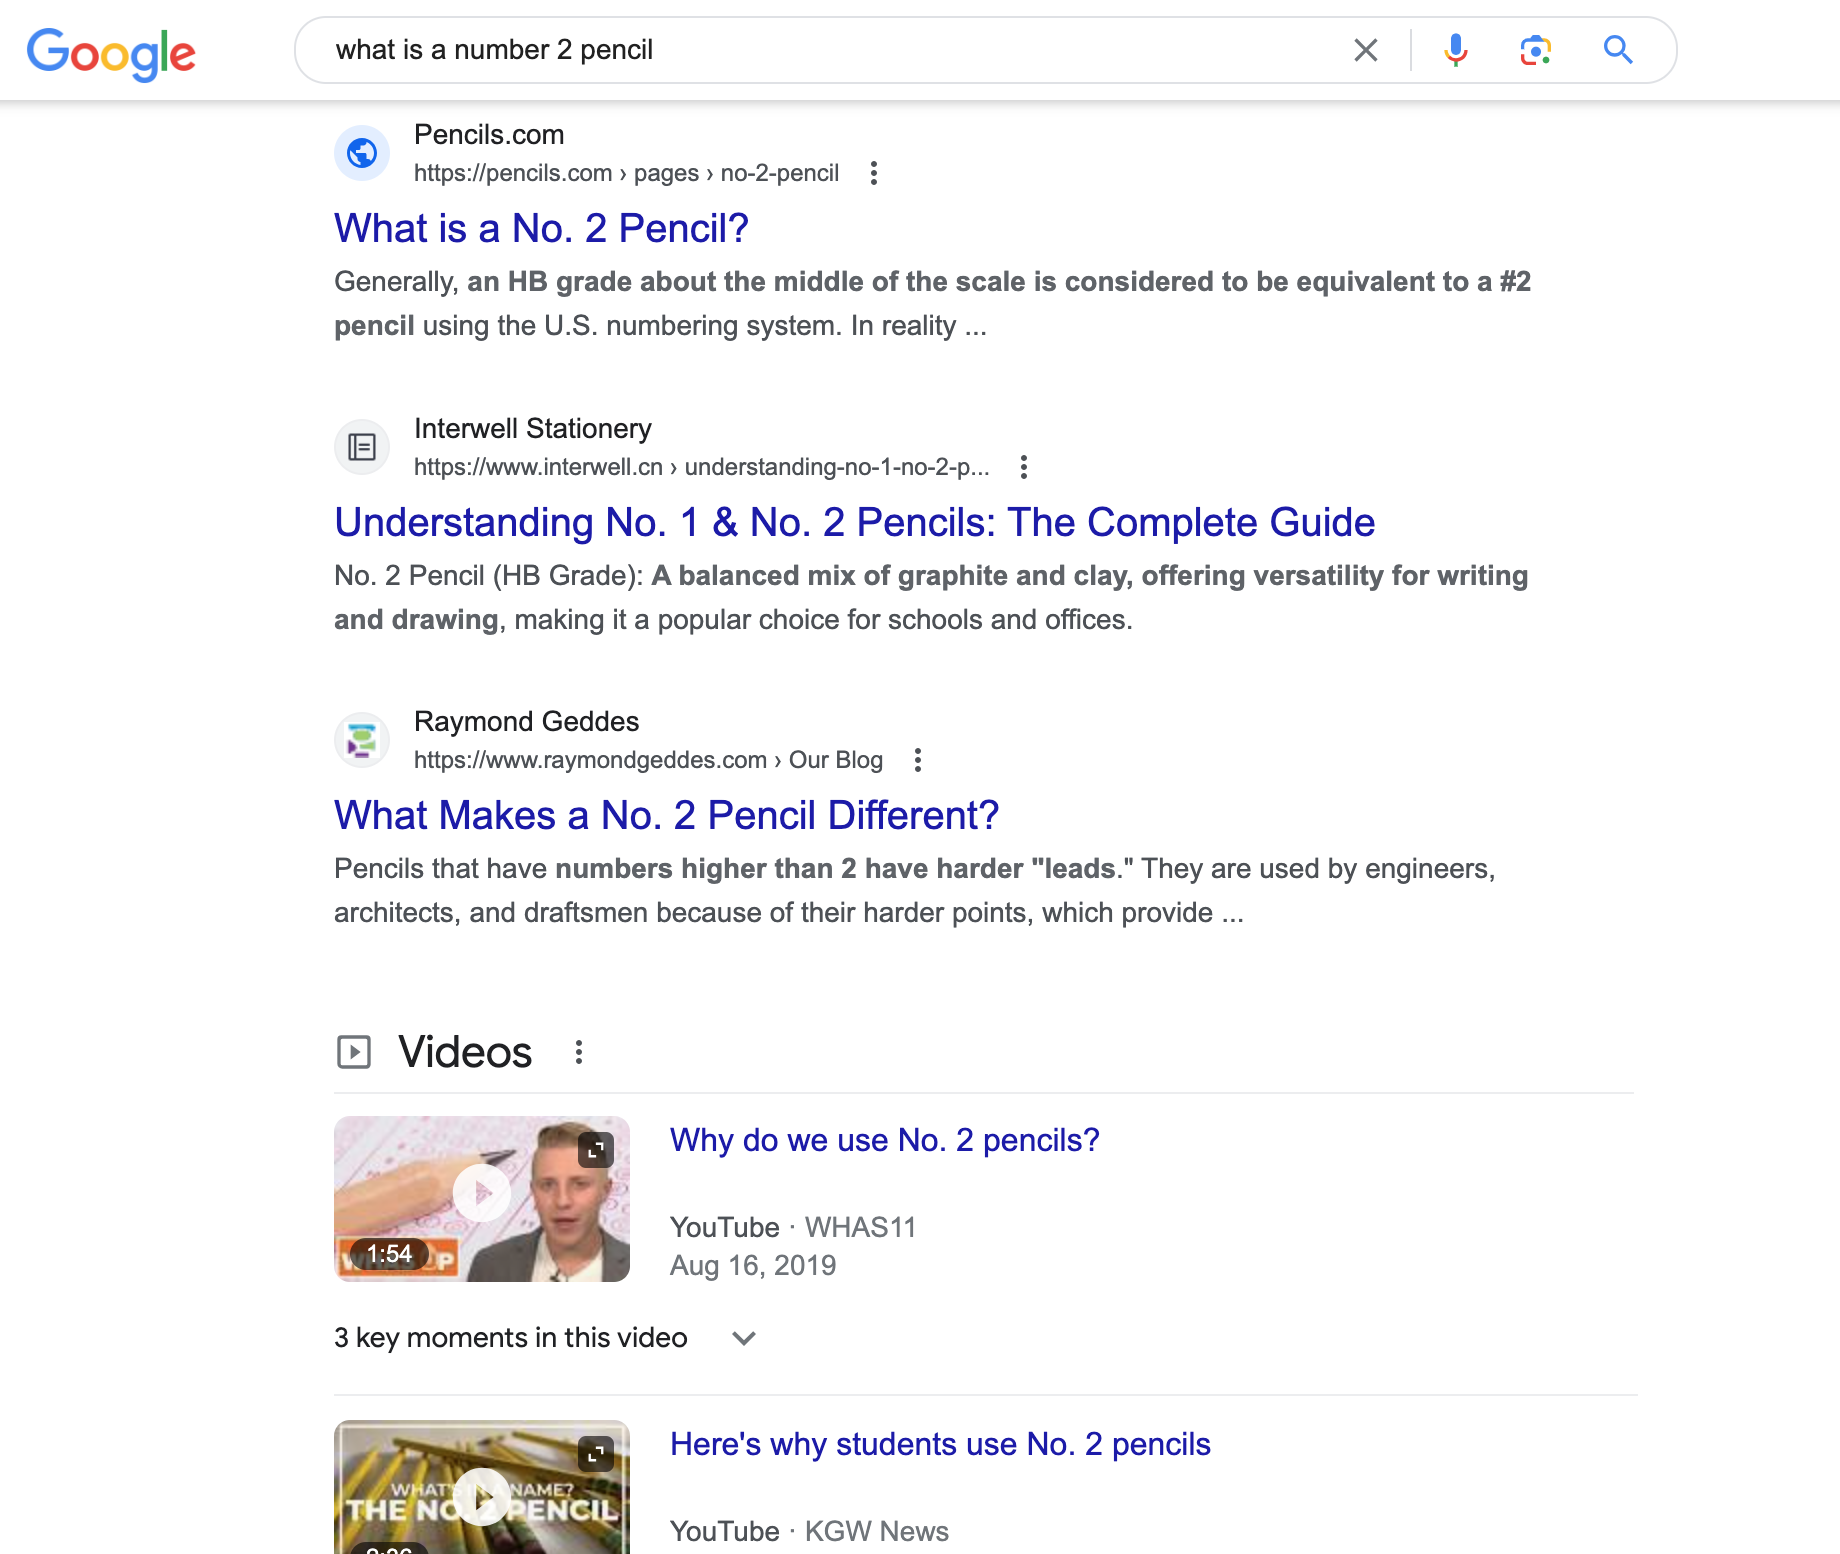 SERP page for keyword phrase "what is a number 2 pencil?" on Google